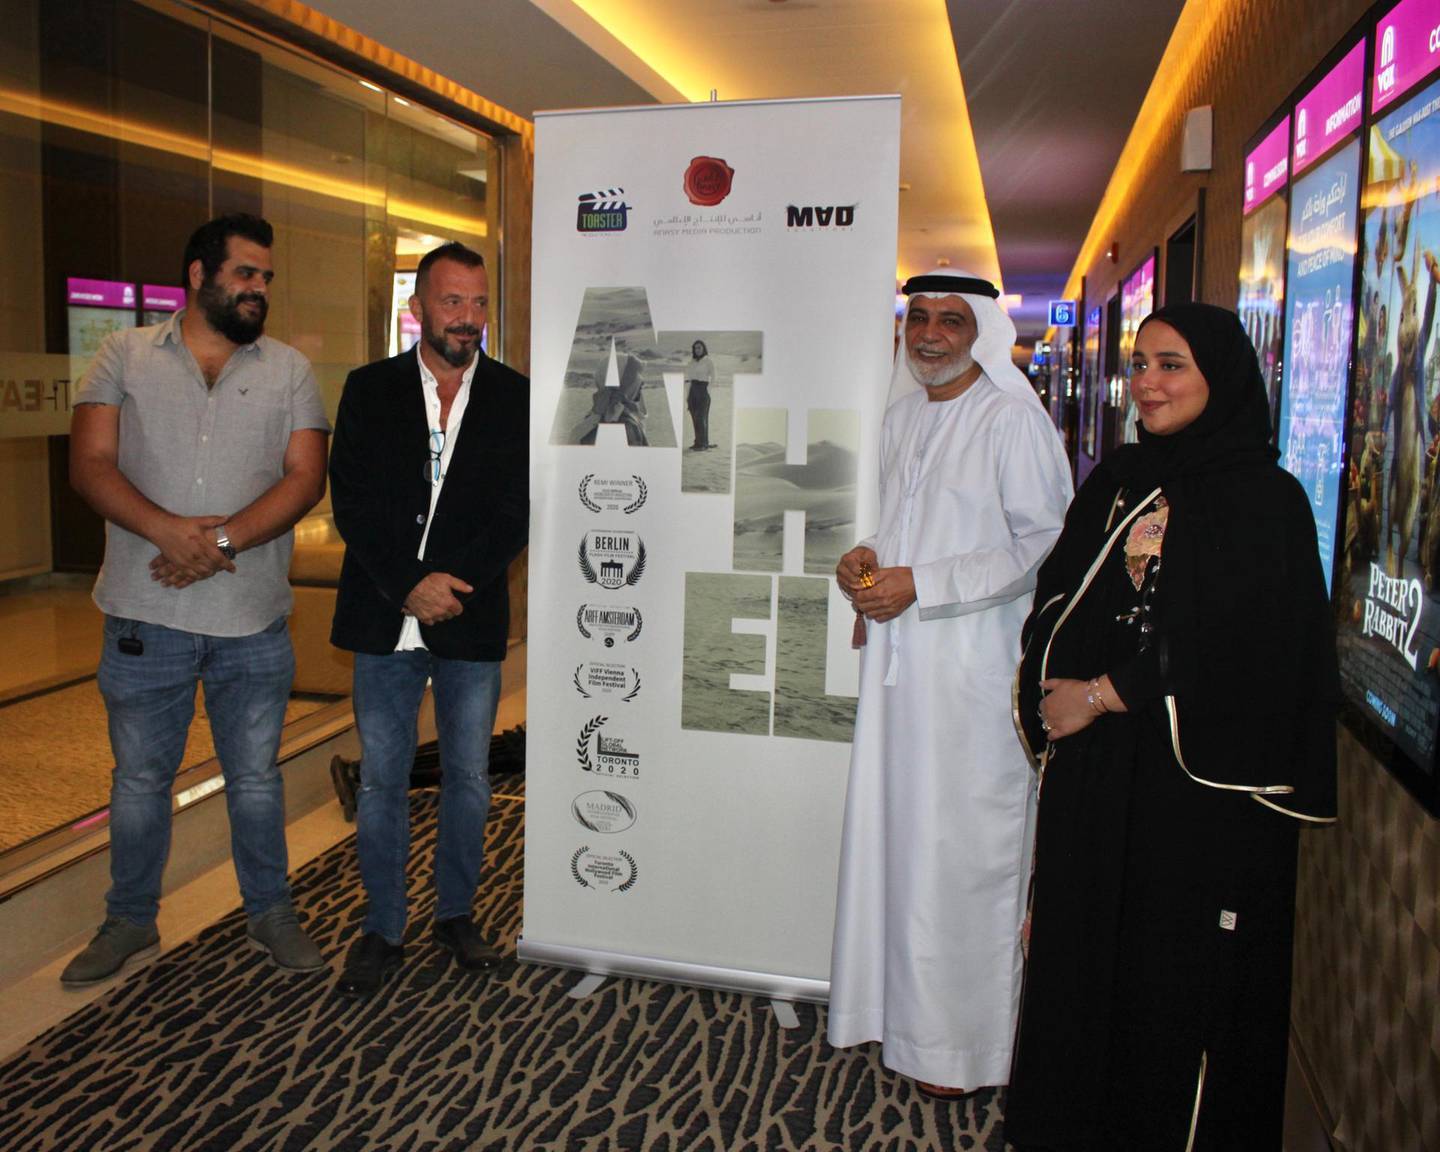 'Athel' locally premiered at Nation Towers in Abu Dhabi on Monday, August 31. Mad Solutions